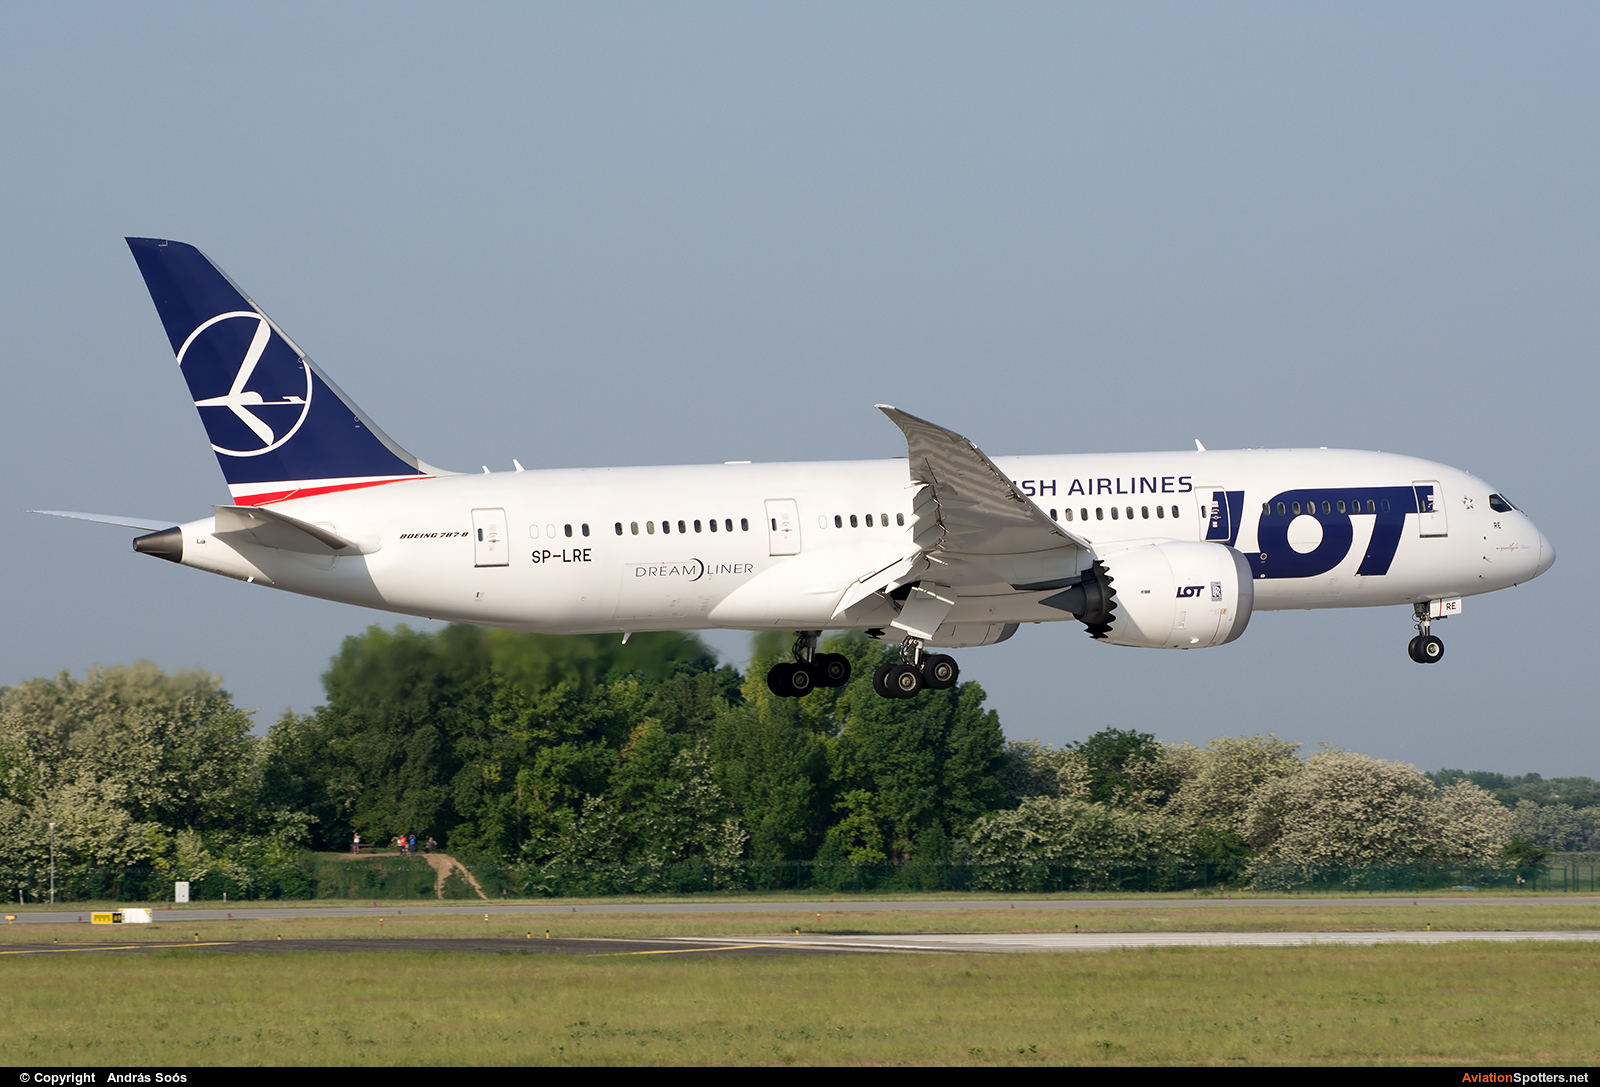 LOT - Polish Airlines  -  787-8 Dreamliner  (SP-LRE) By András Soós (sas1965)